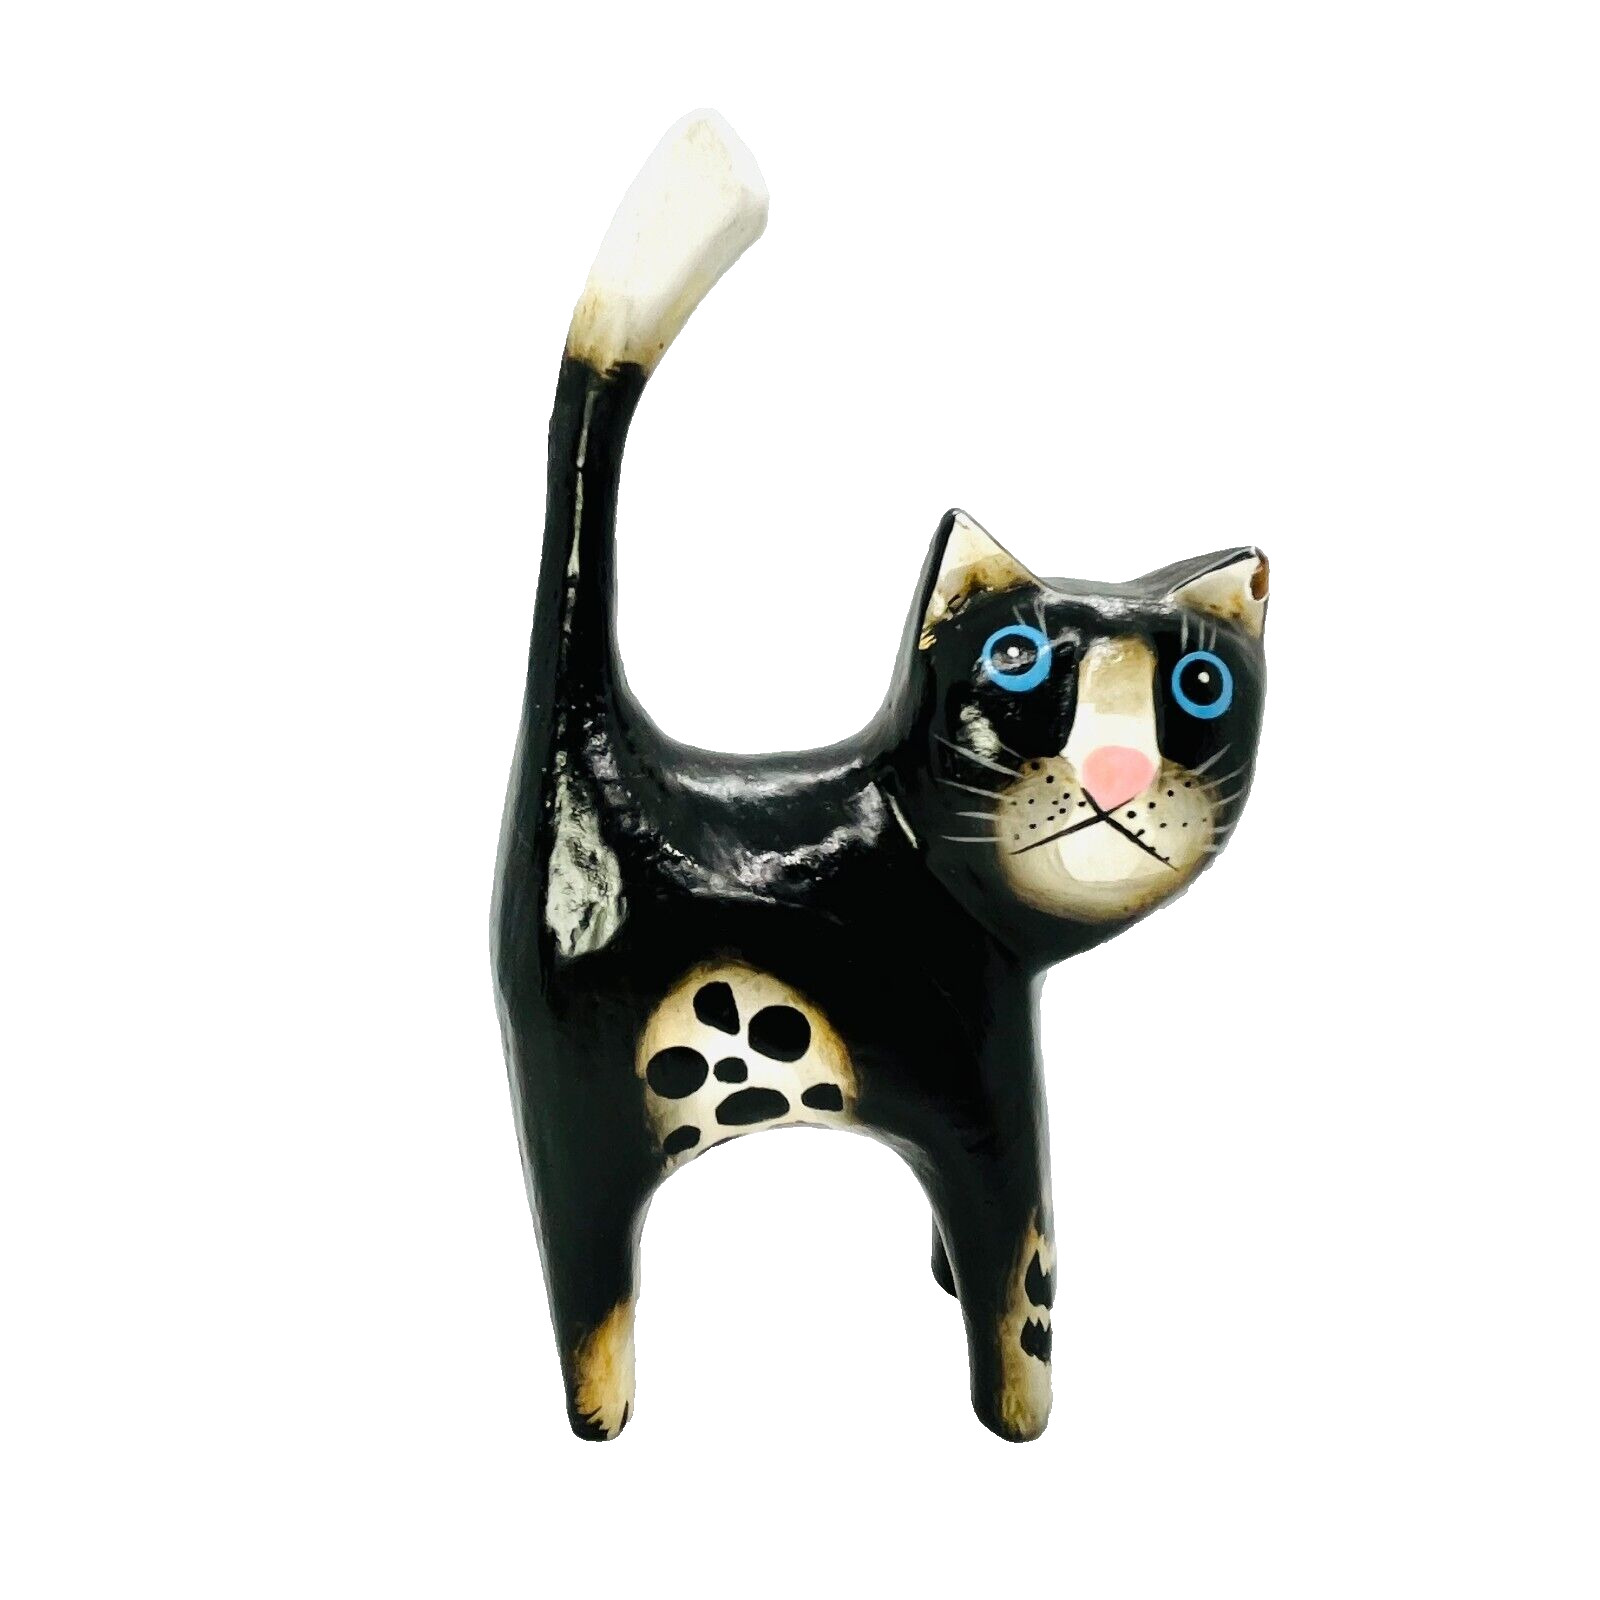 Bali Handmade Wooden Carved Cat Black, white tip of tail Indonesia 4in